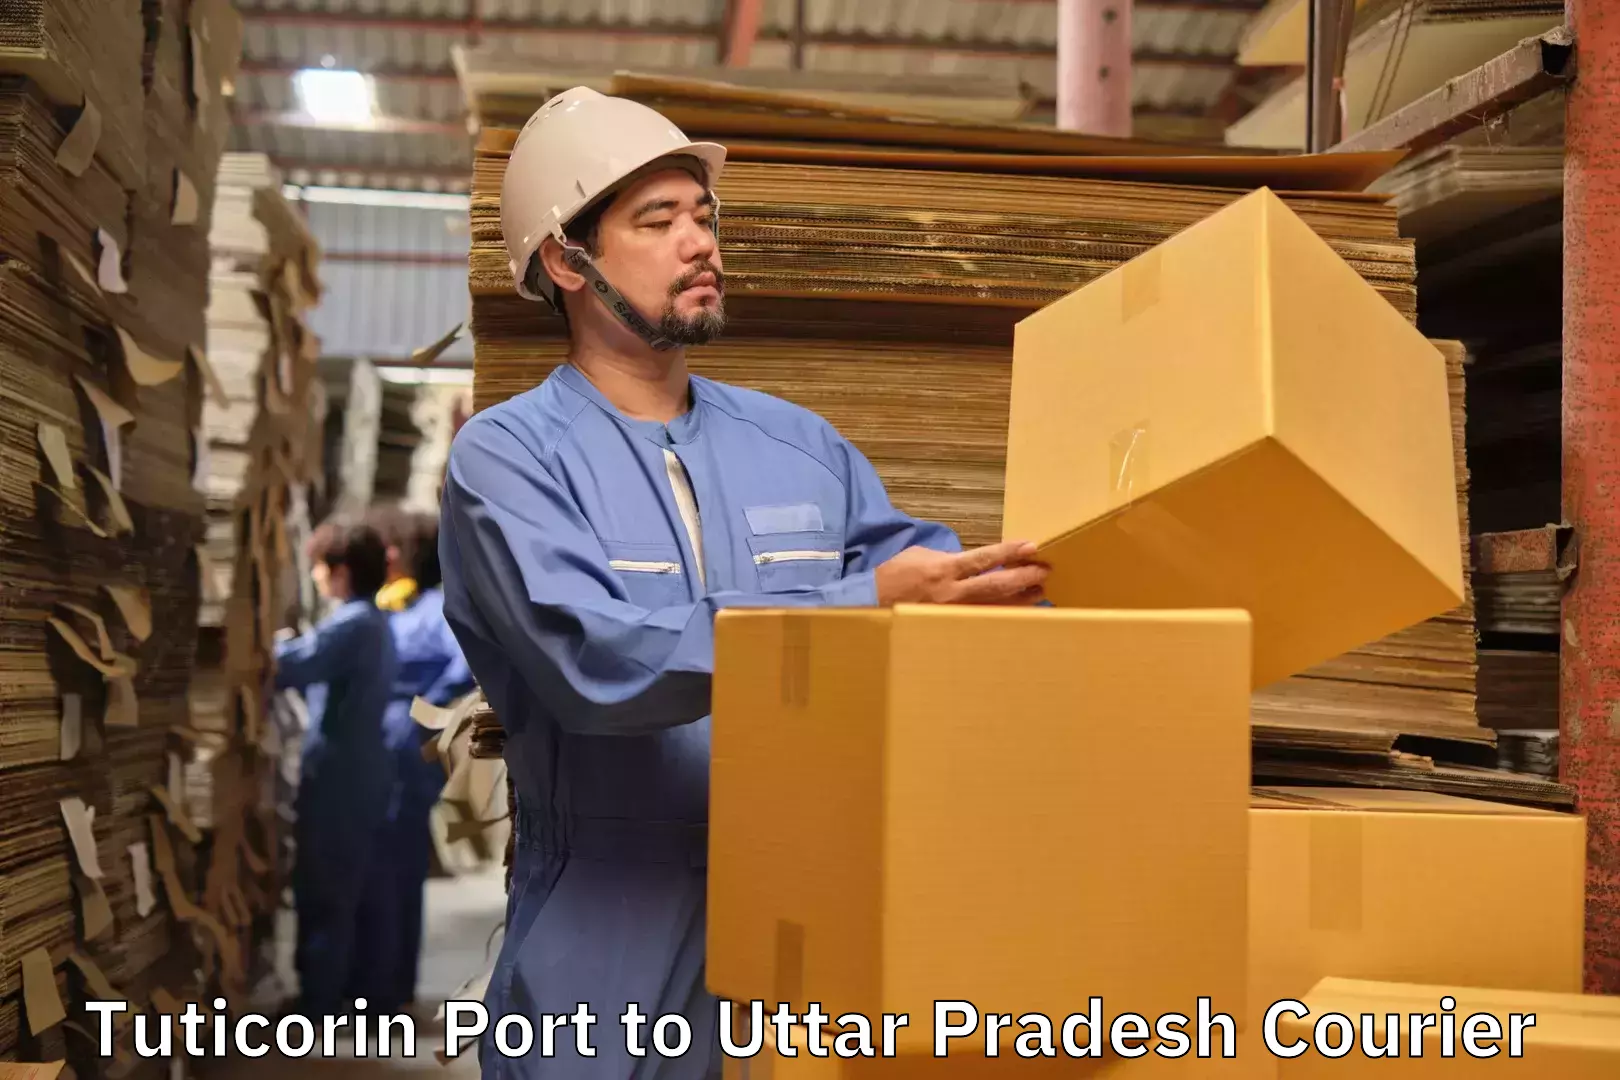 Baggage shipping experience Tuticorin Port to Sitapur